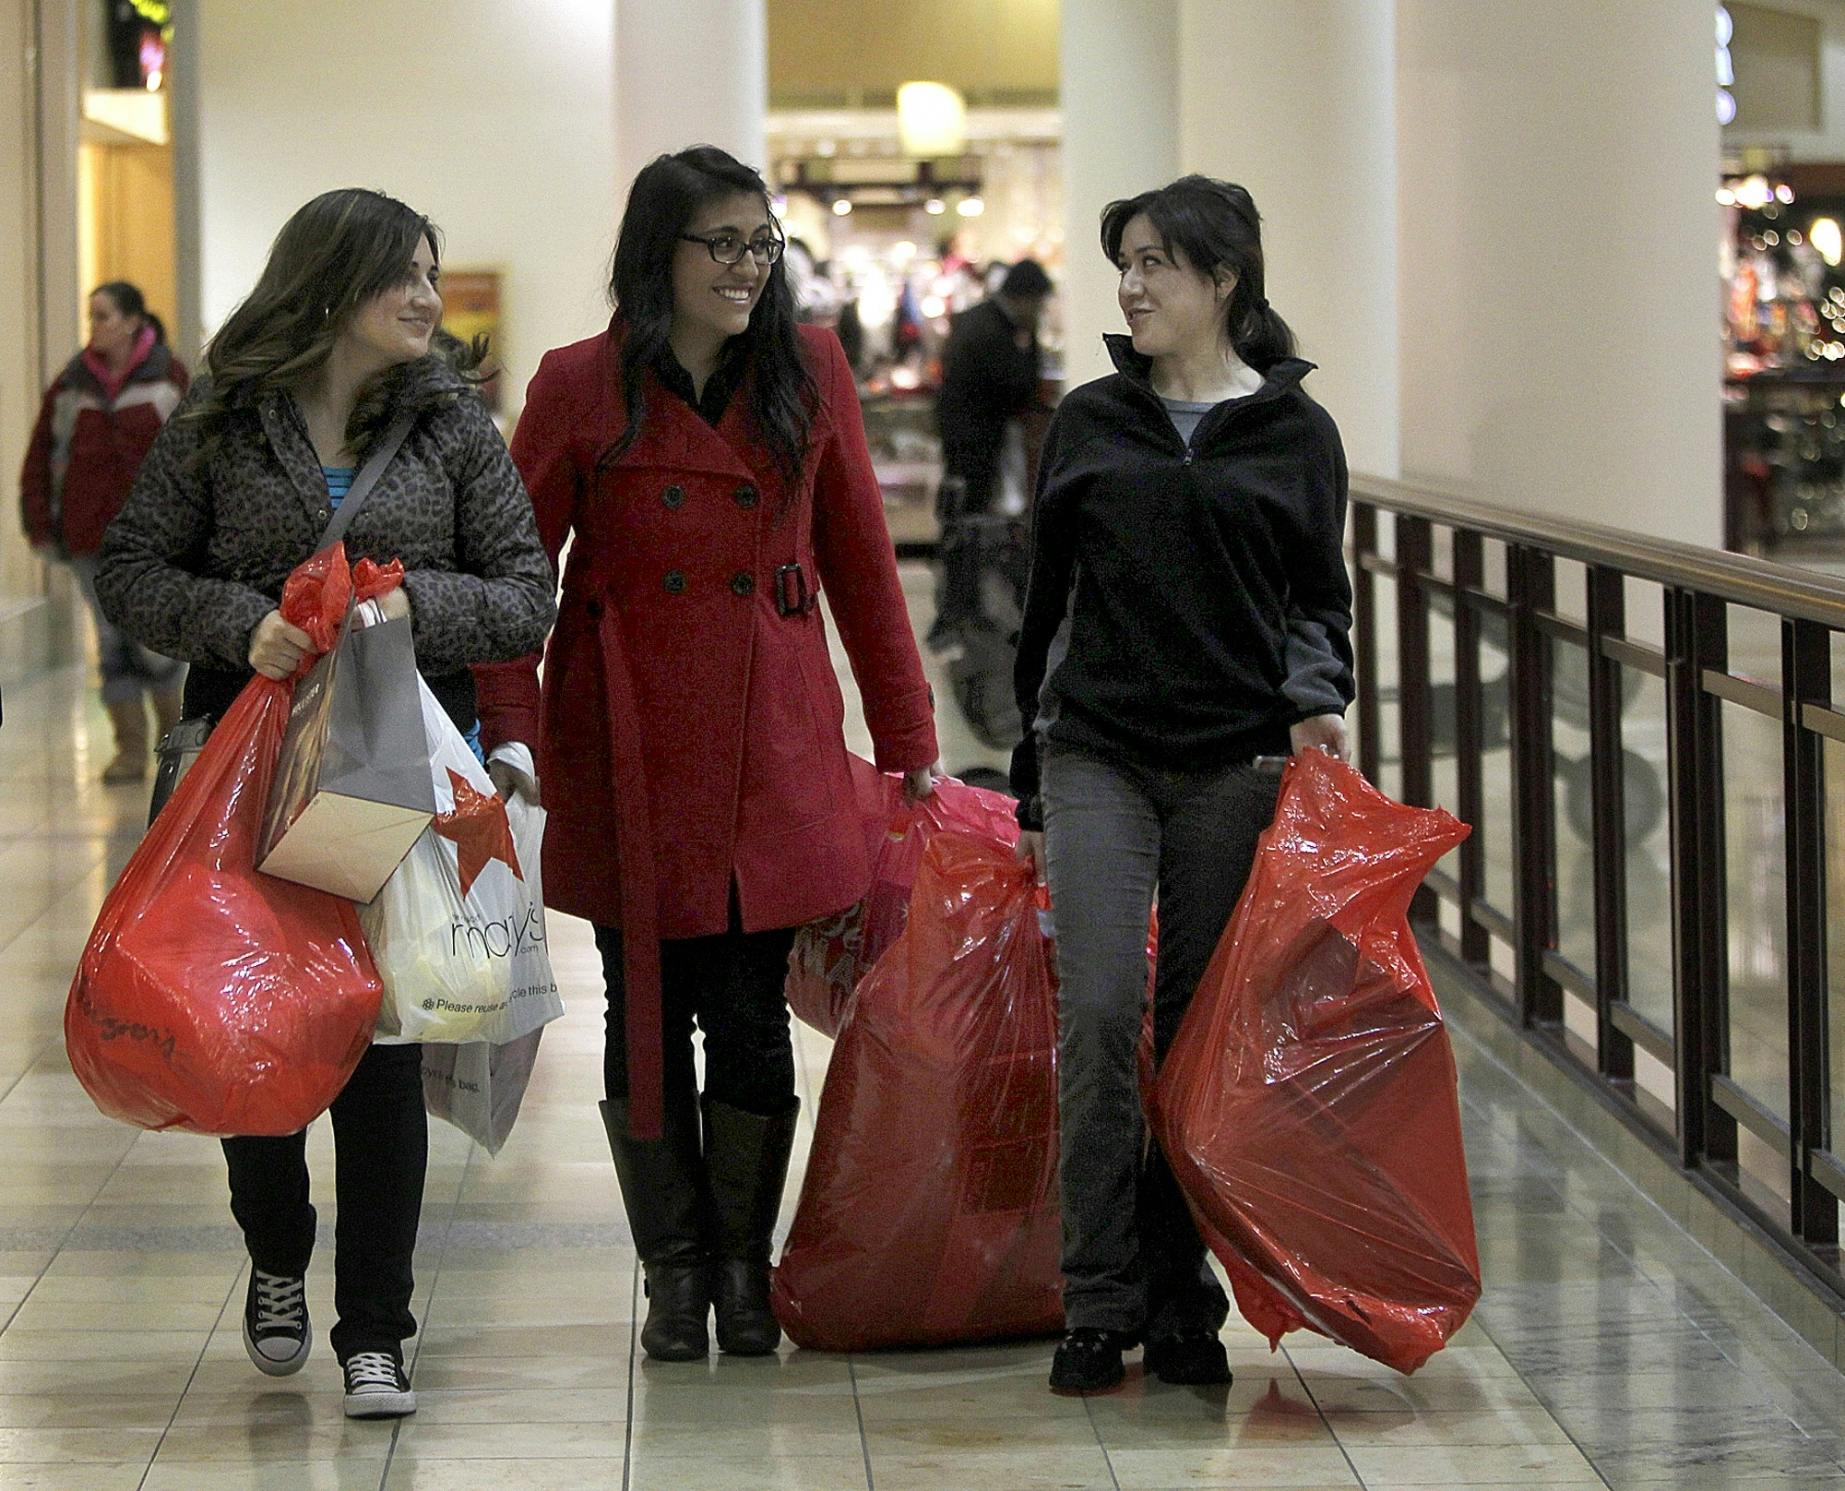 Shoppers around the metro braved cold winds and snow Thursday night to get a jump on their Black Friday shopping.